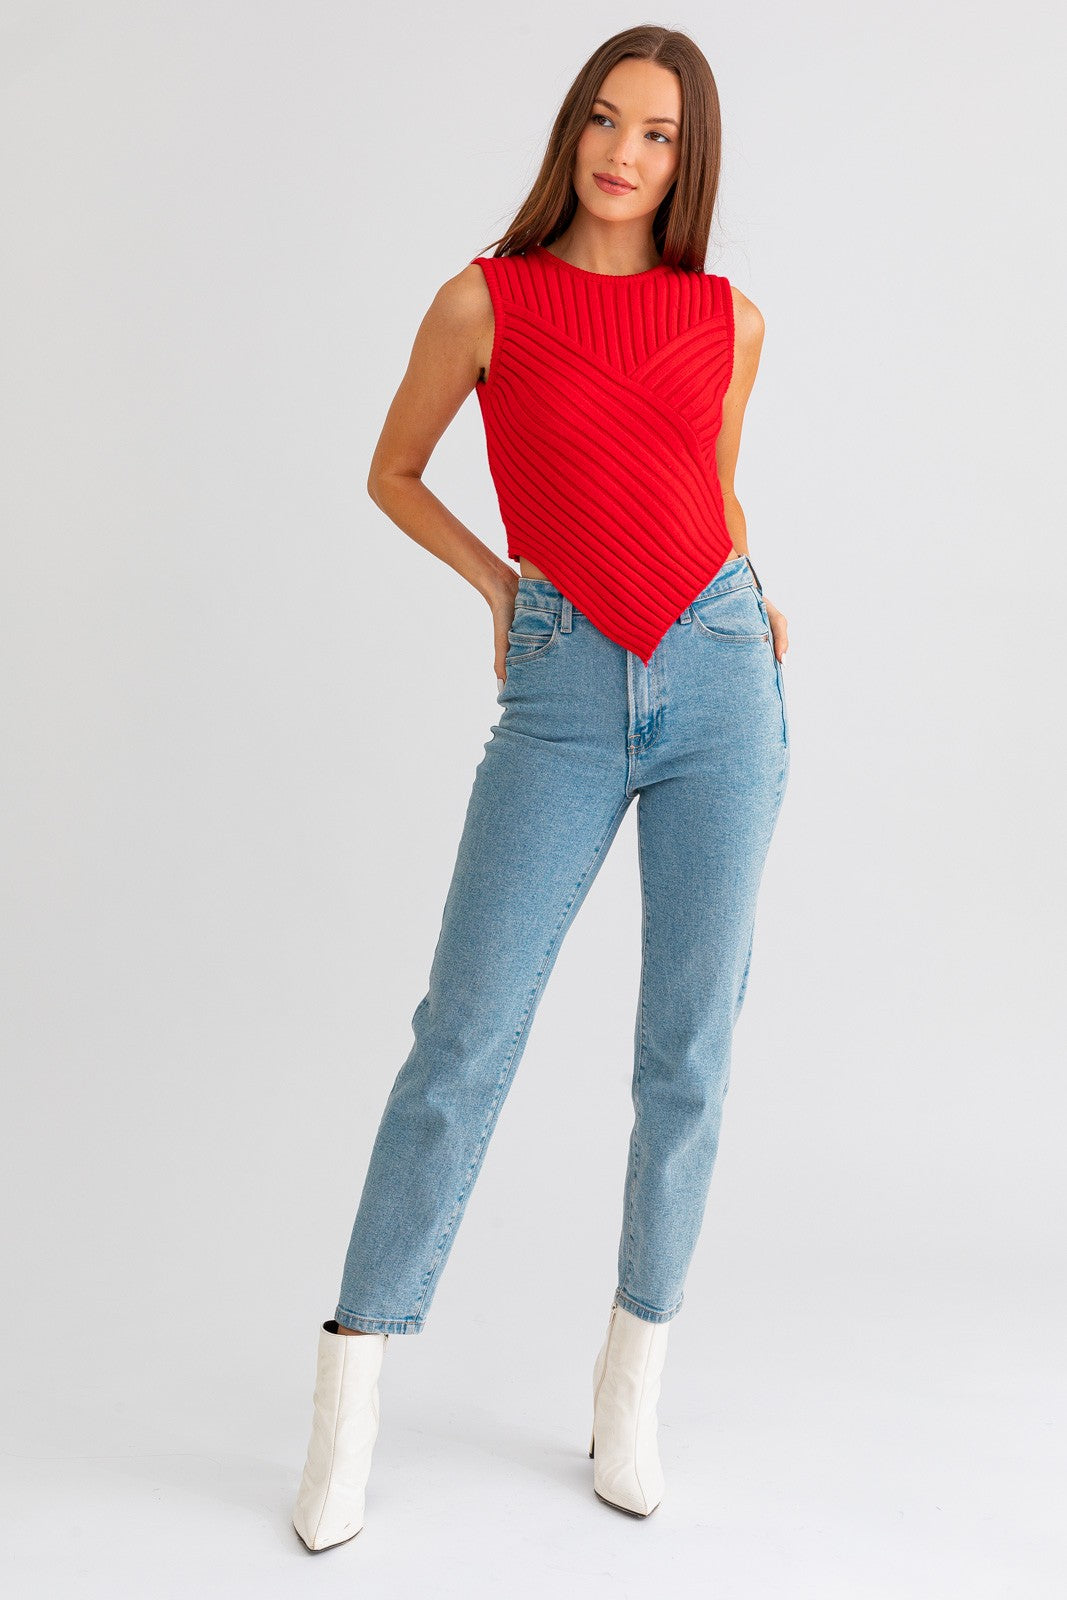 Radiant Red Ripple Top